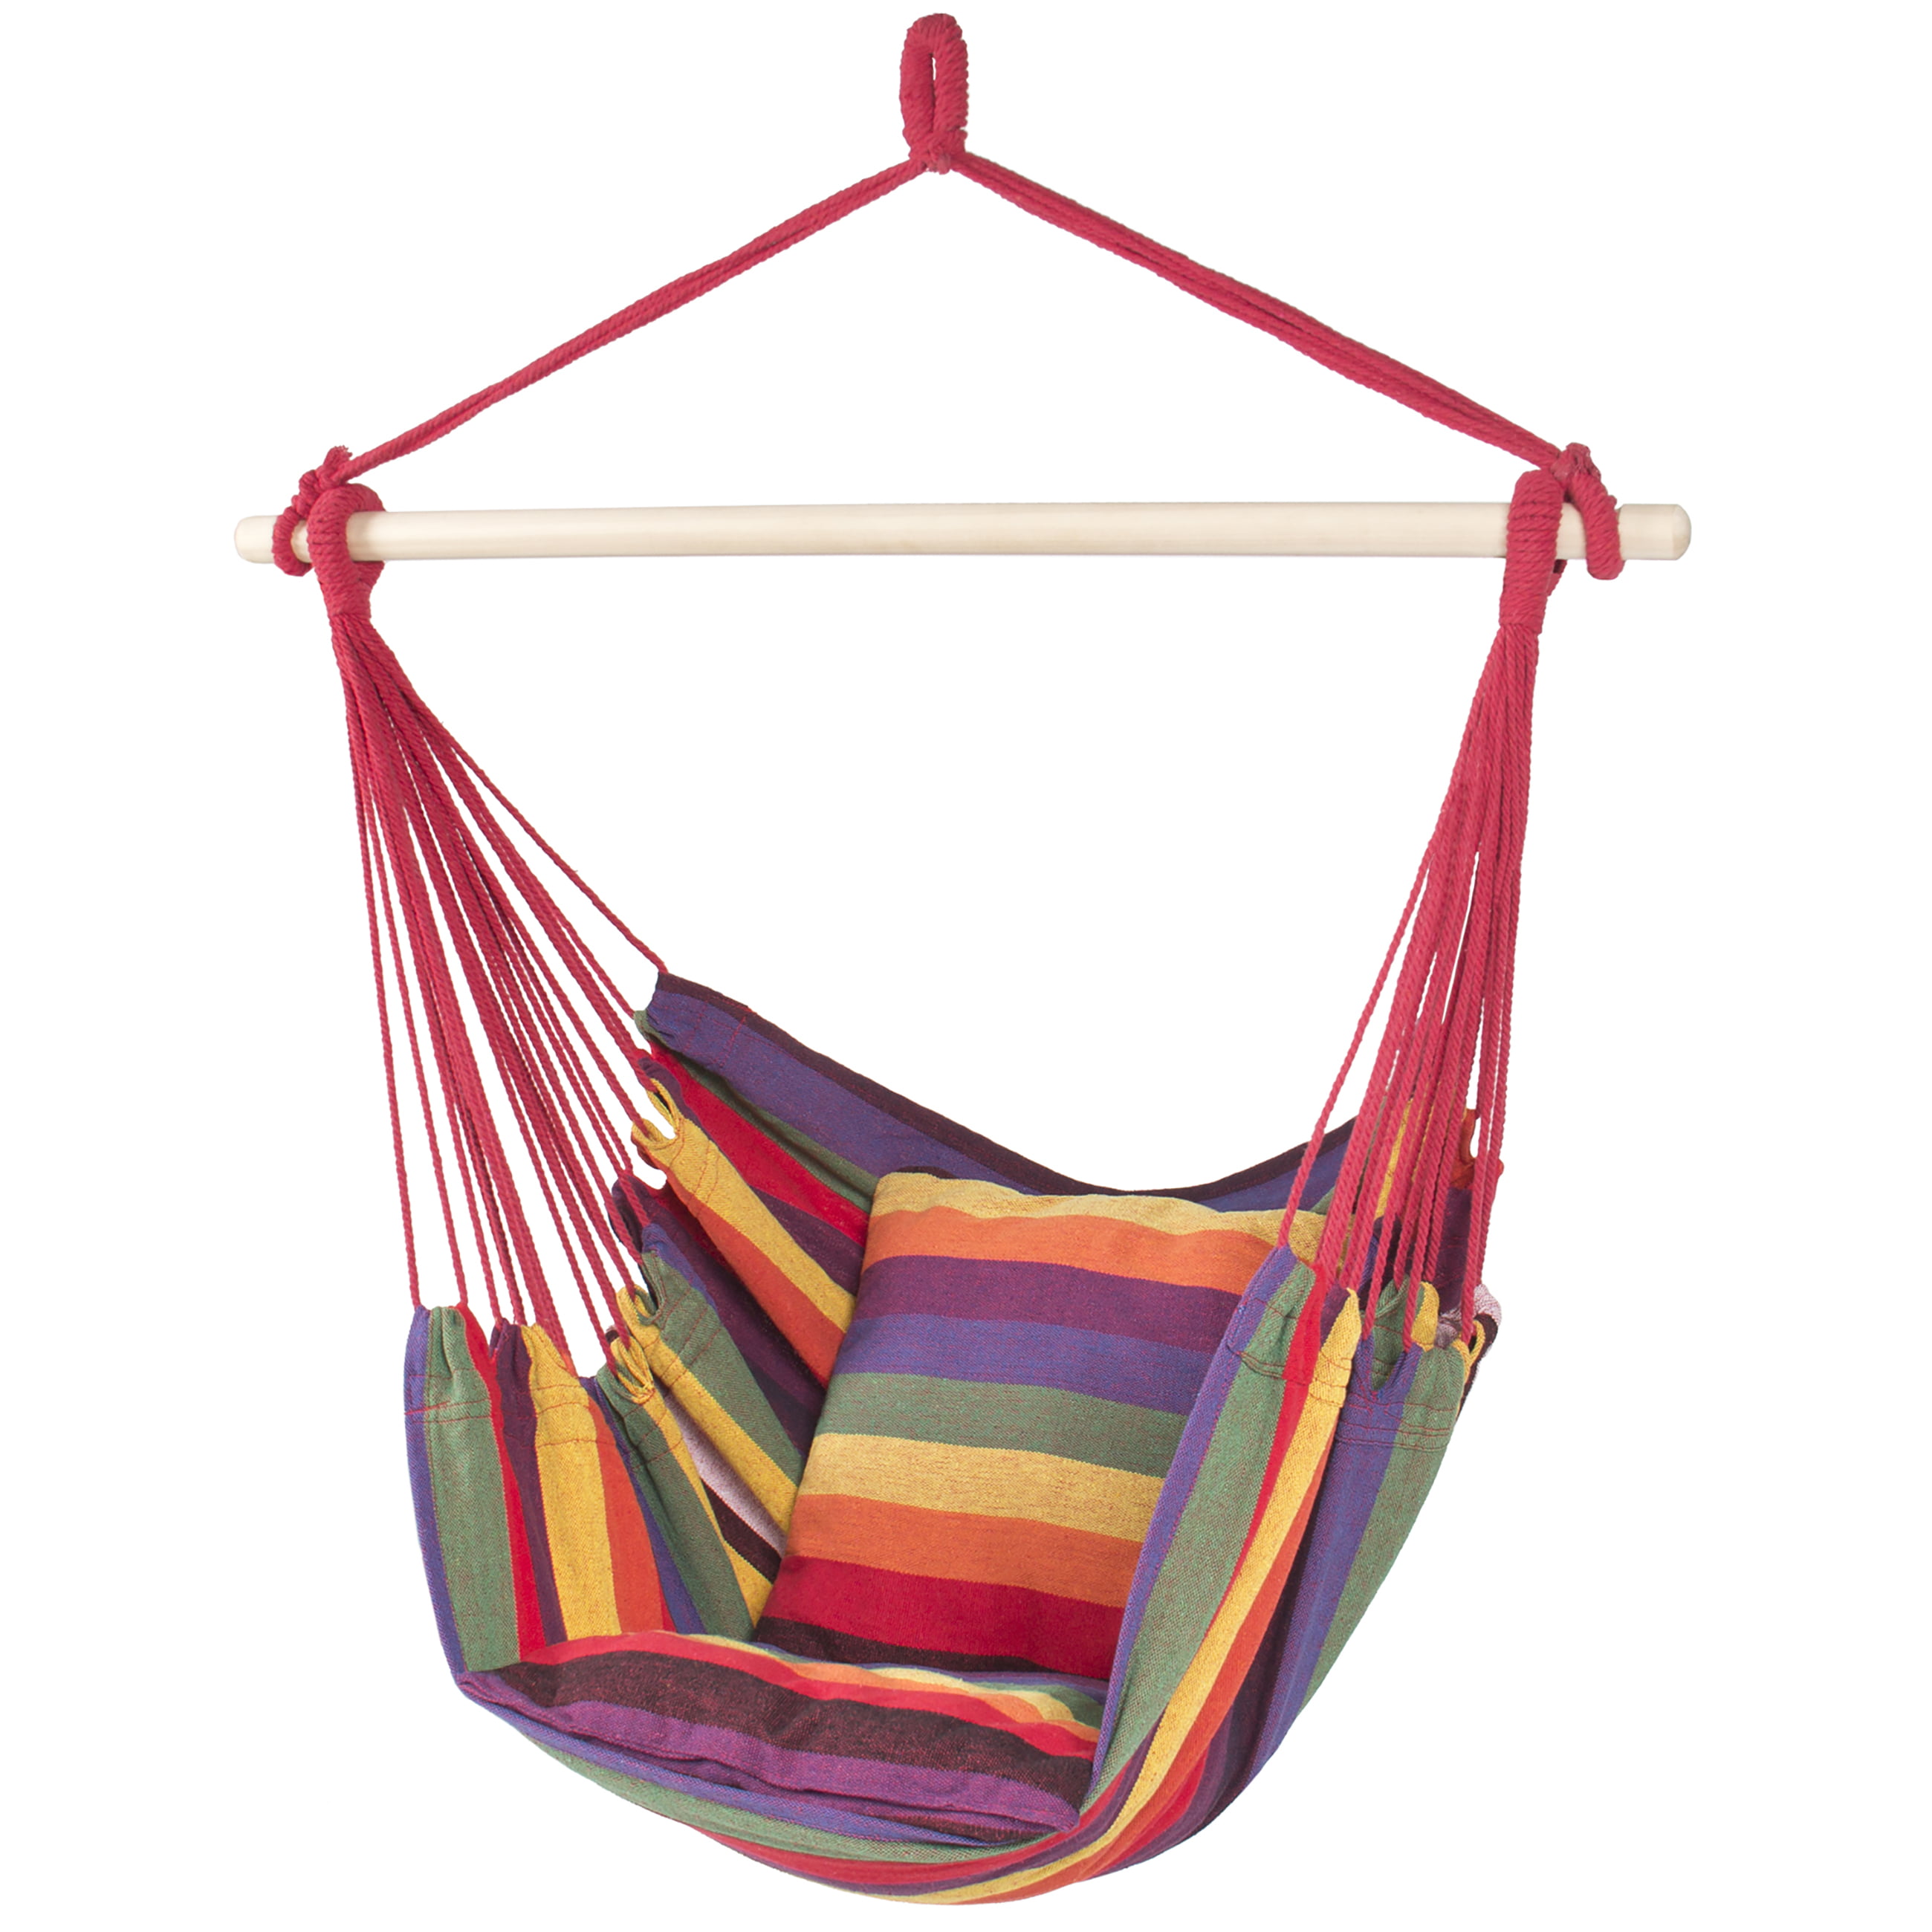 Best Choice Products Portable Hanging Cotton Hammock Rope Chair